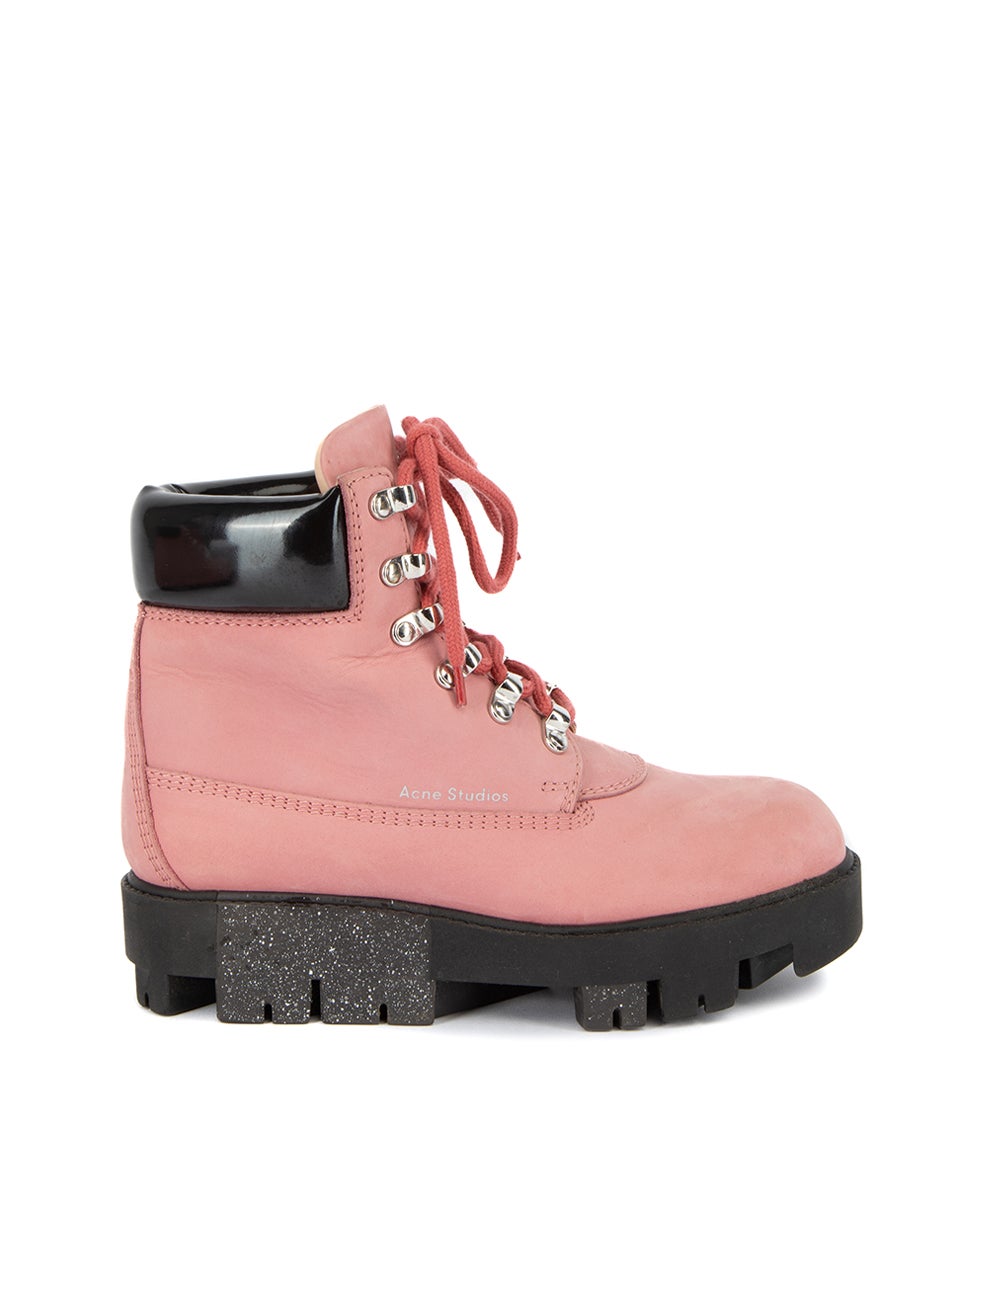 Pre-Loved Acne Studios Women's Pink Lace Up Hiking Boots